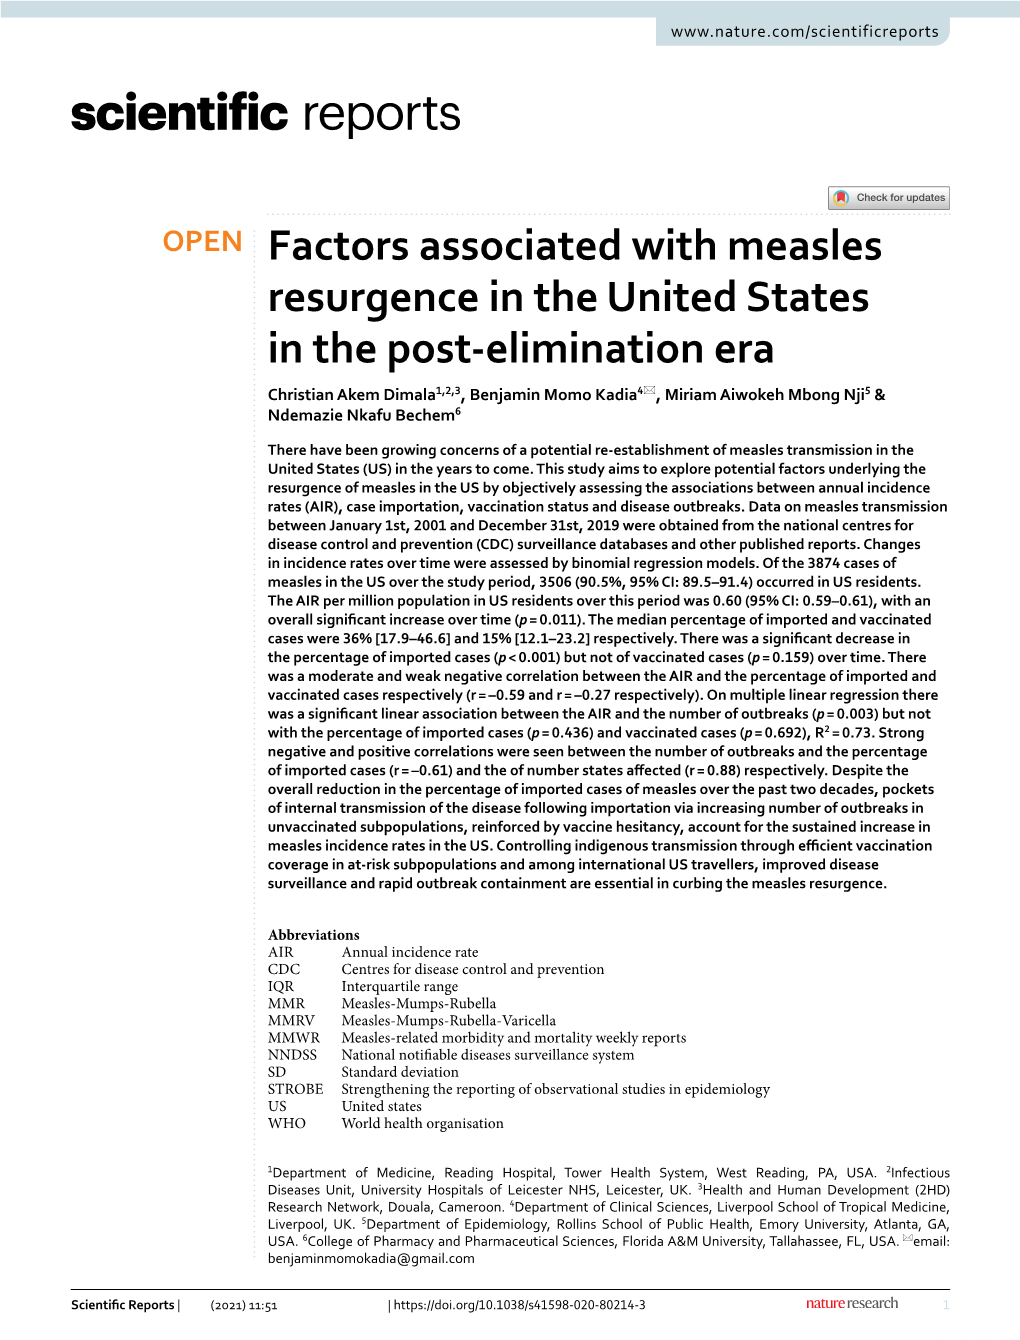 Factors Associated with Measles Resurgence in the United States In